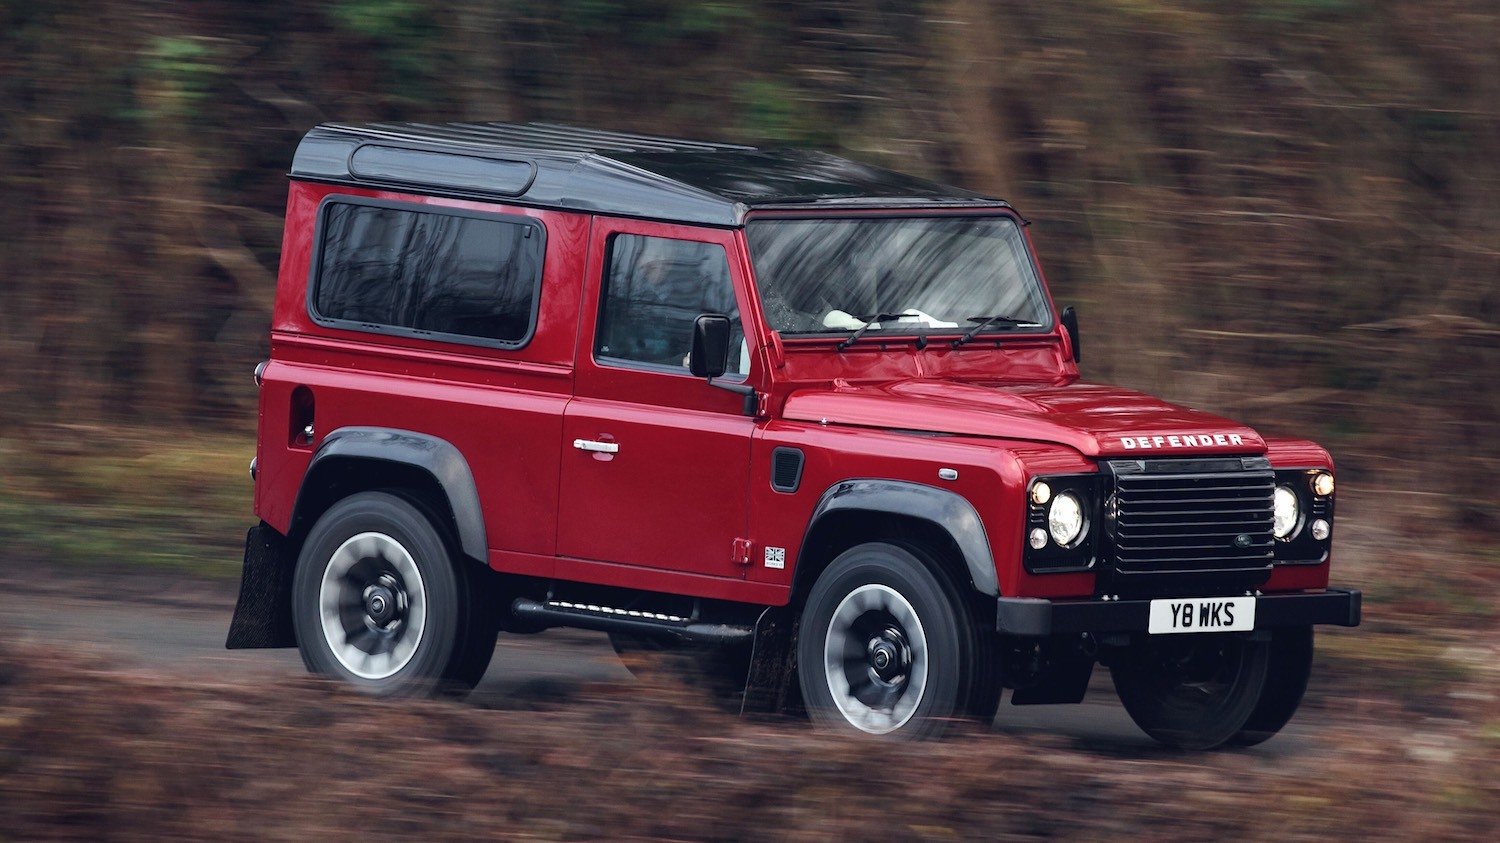 The latest 70th Edition Defender for the JPR 2018 70th Anniversary Celebrations 14